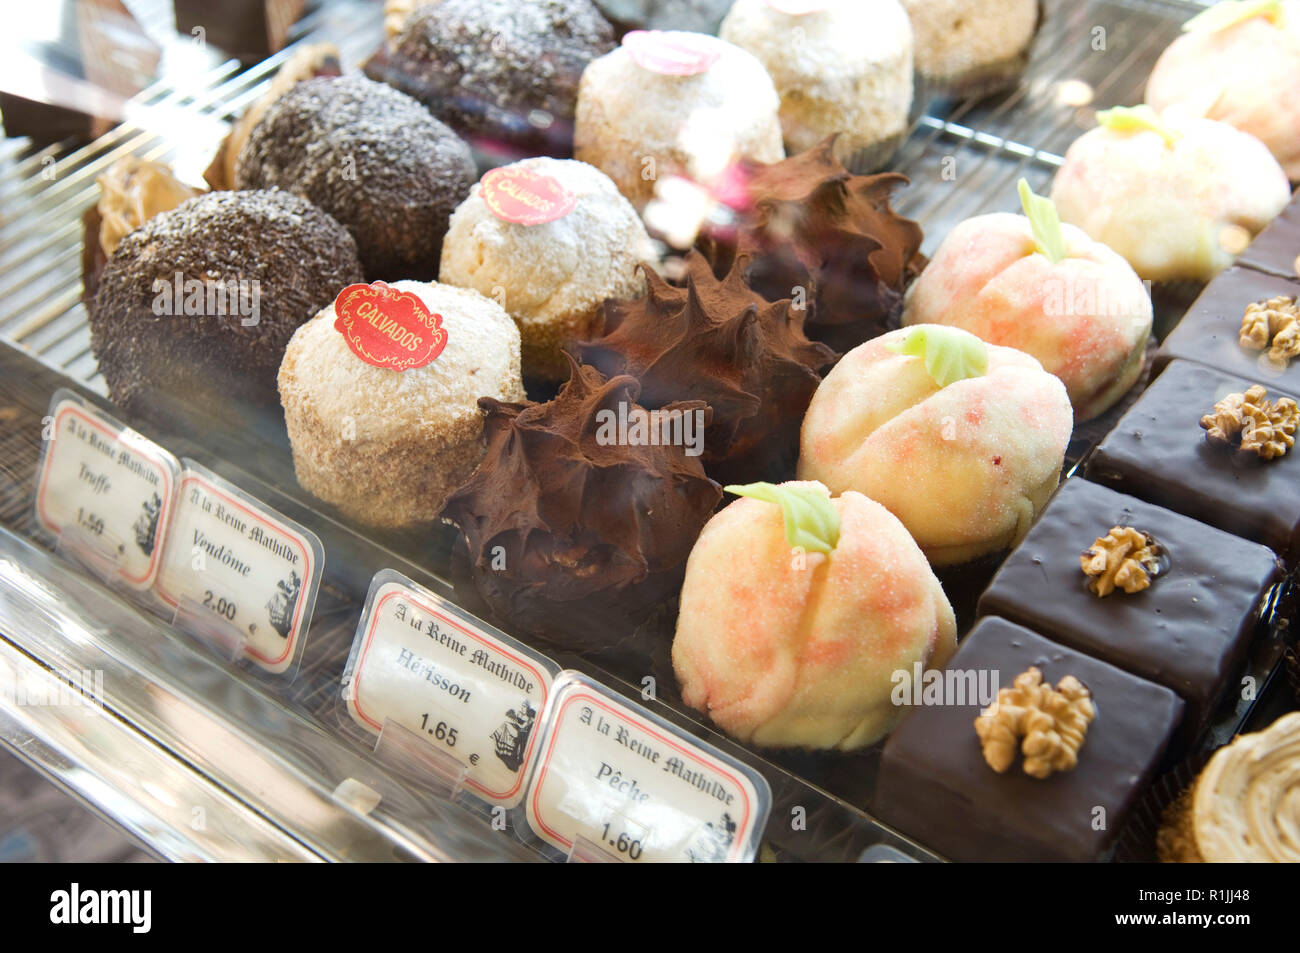 Desserts displayed in bakery Stock Photo